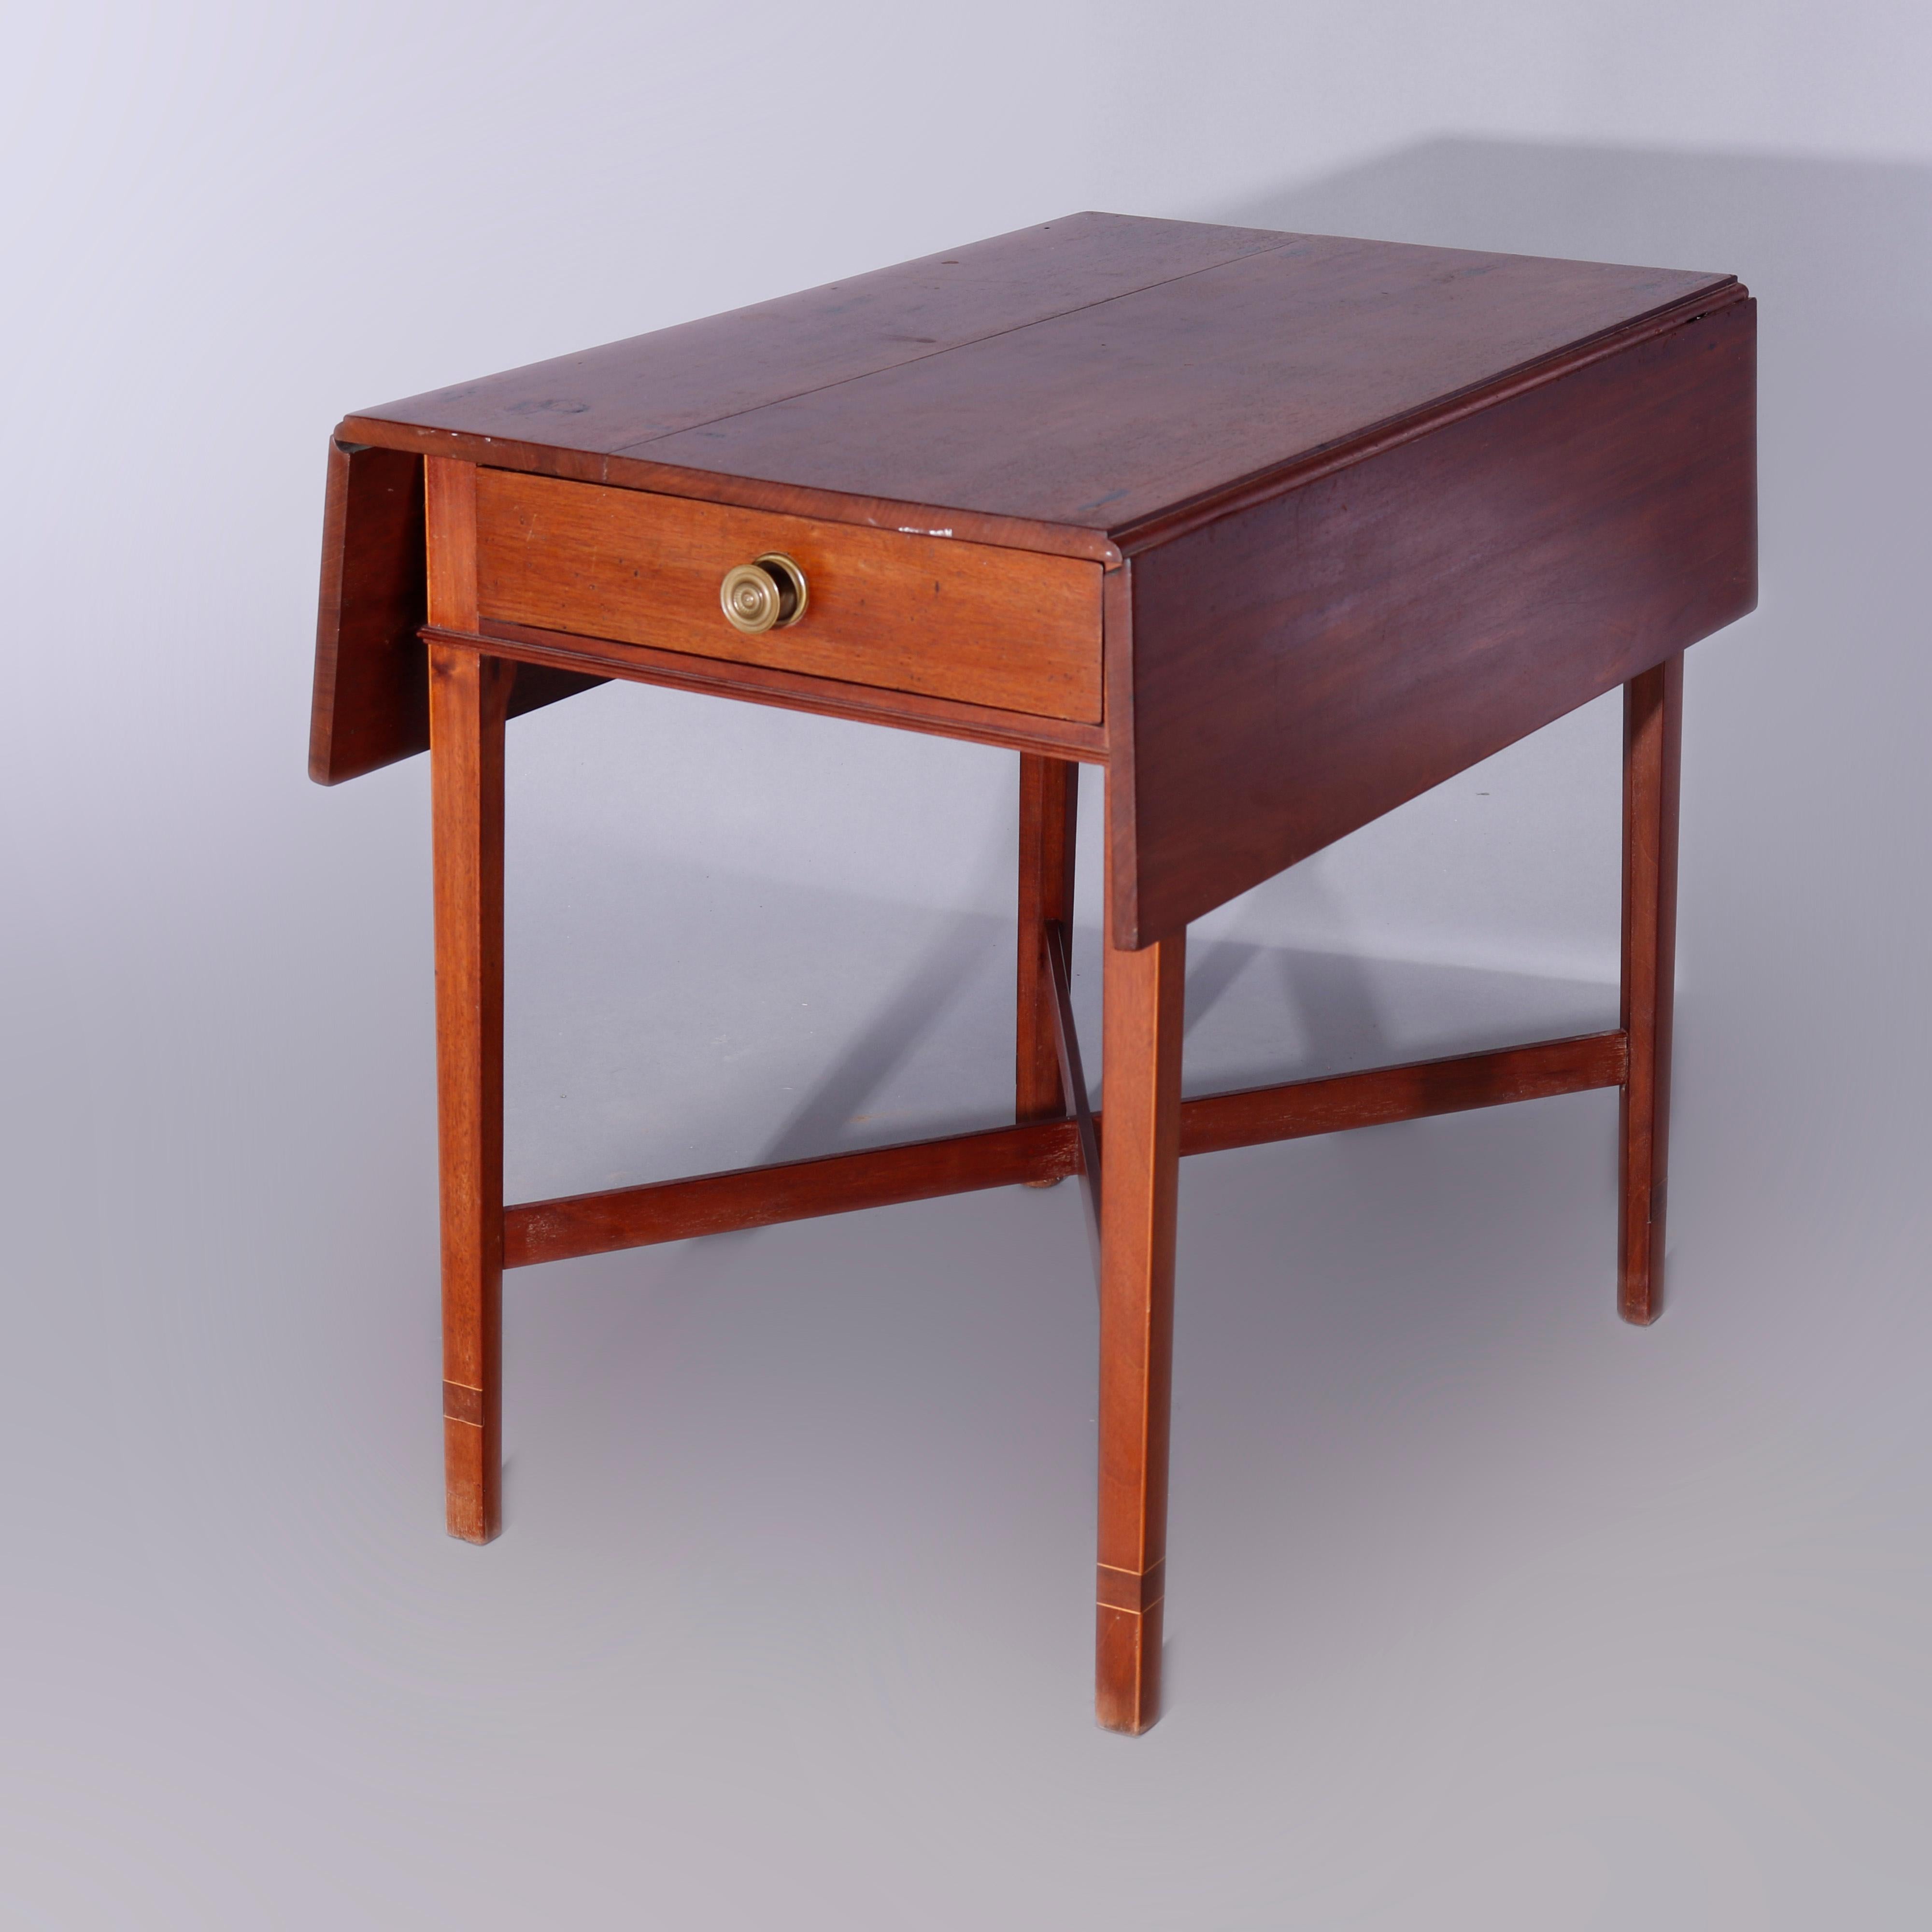 An antique English pembroke table offers mahogany construction with top having drop-leaves over single drawer case, raised on square and tapered legs having x-form stretcher, c1820

Measures - 27.25'' H x 31.5'' W x 19.5'' D.

Catalogue Note: Ask